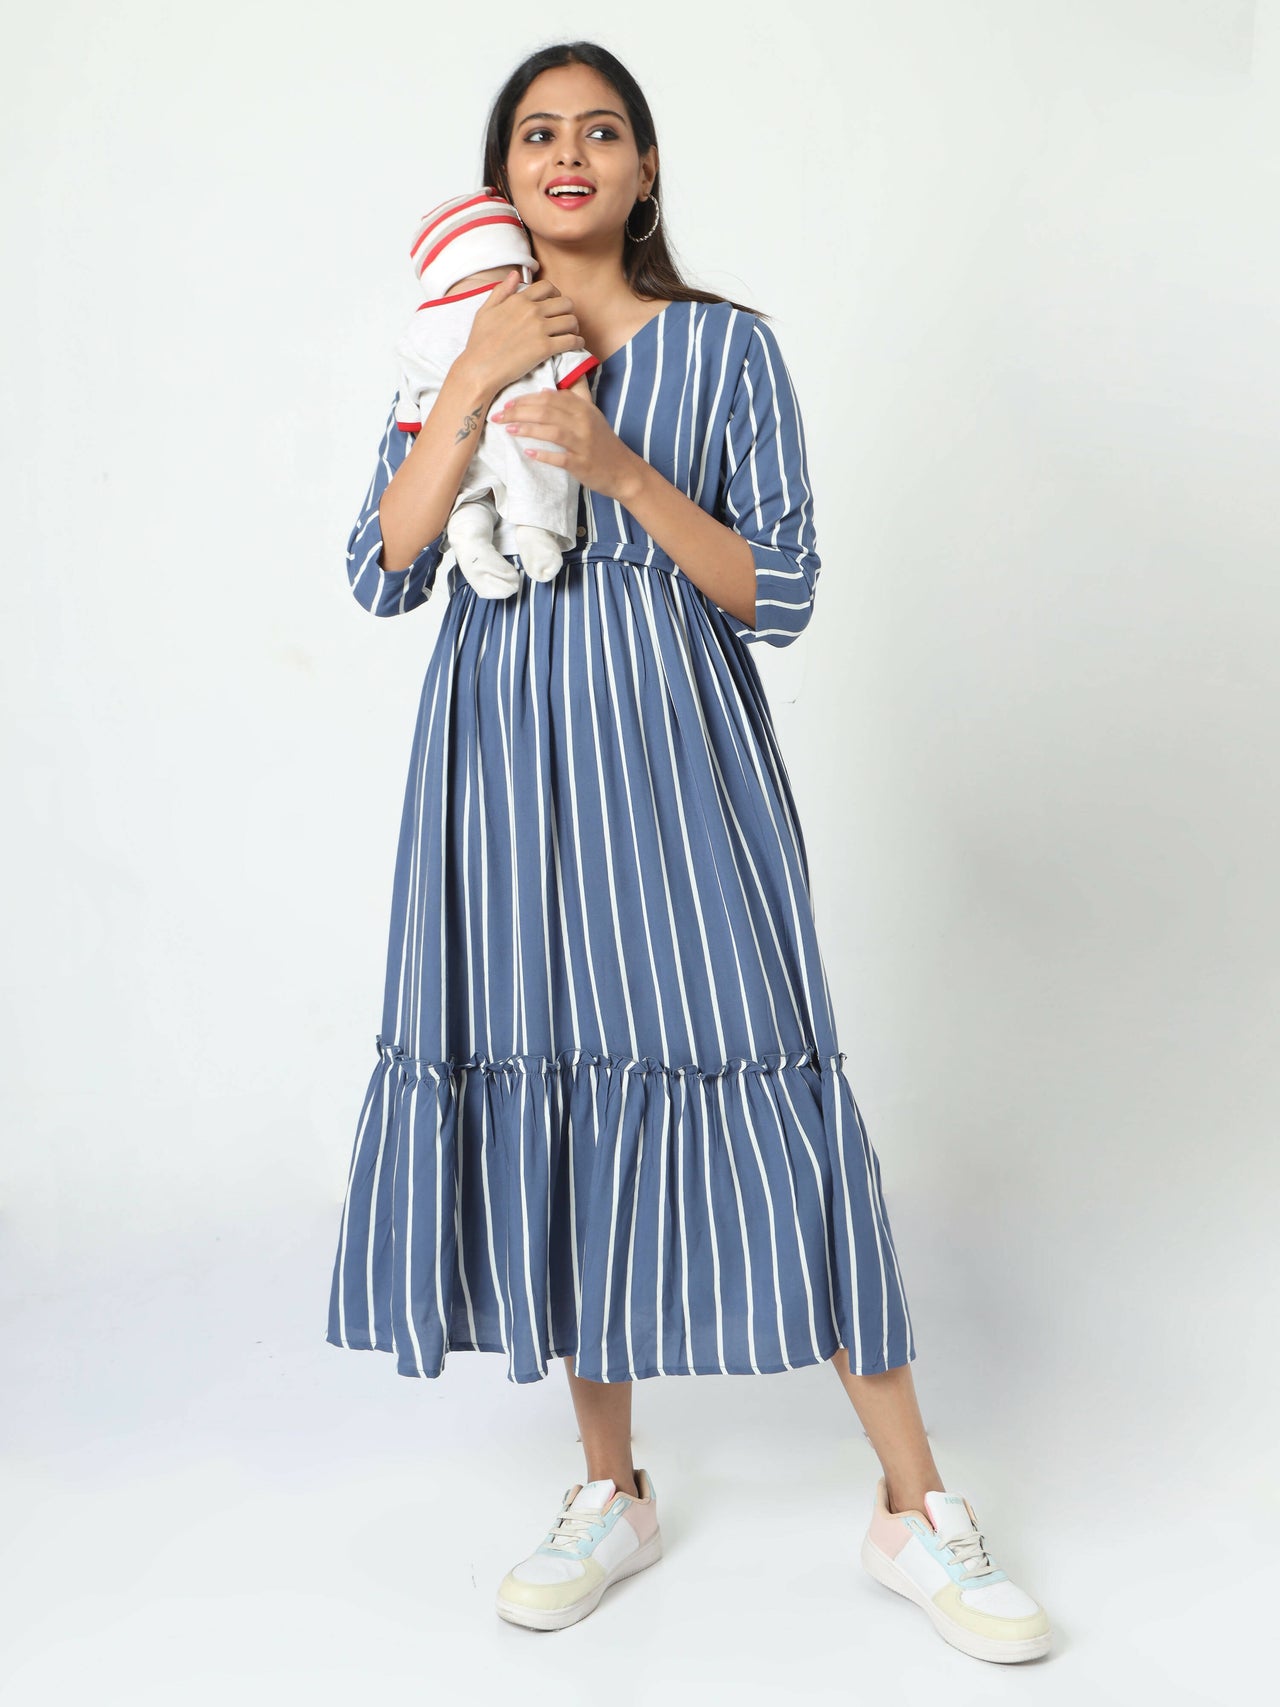 Manet Three Fourth Maternity Dress Striped With Concealed Zipper Nursing Access - Blue - Distacart